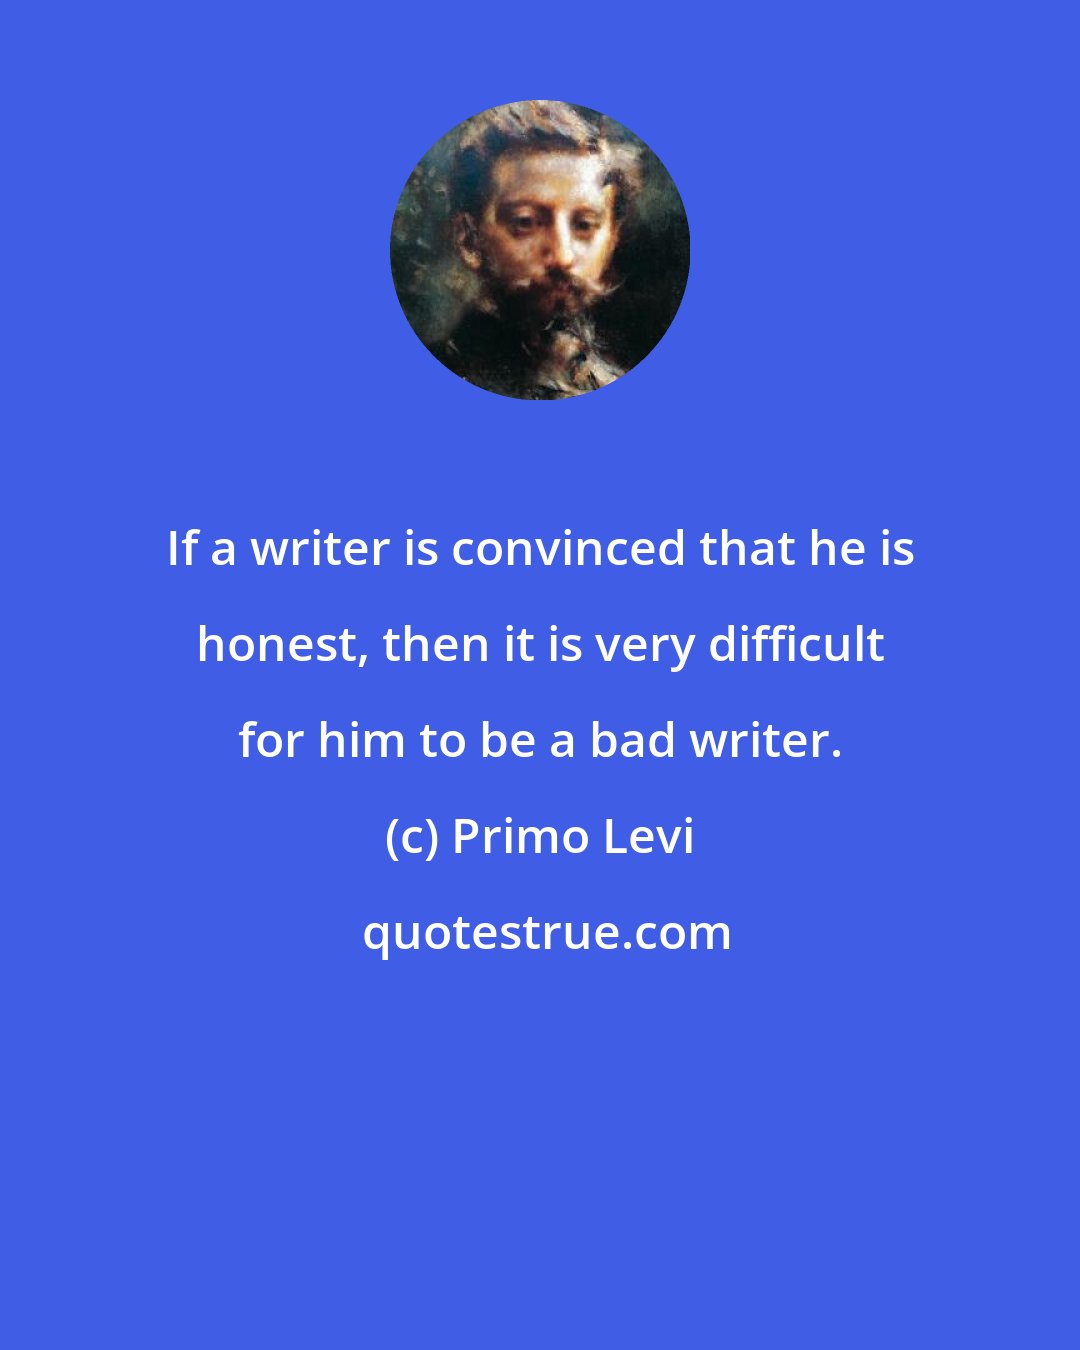 Primo Levi: If a writer is convinced that he is honest, then it is very difficult for him to be a bad writer.